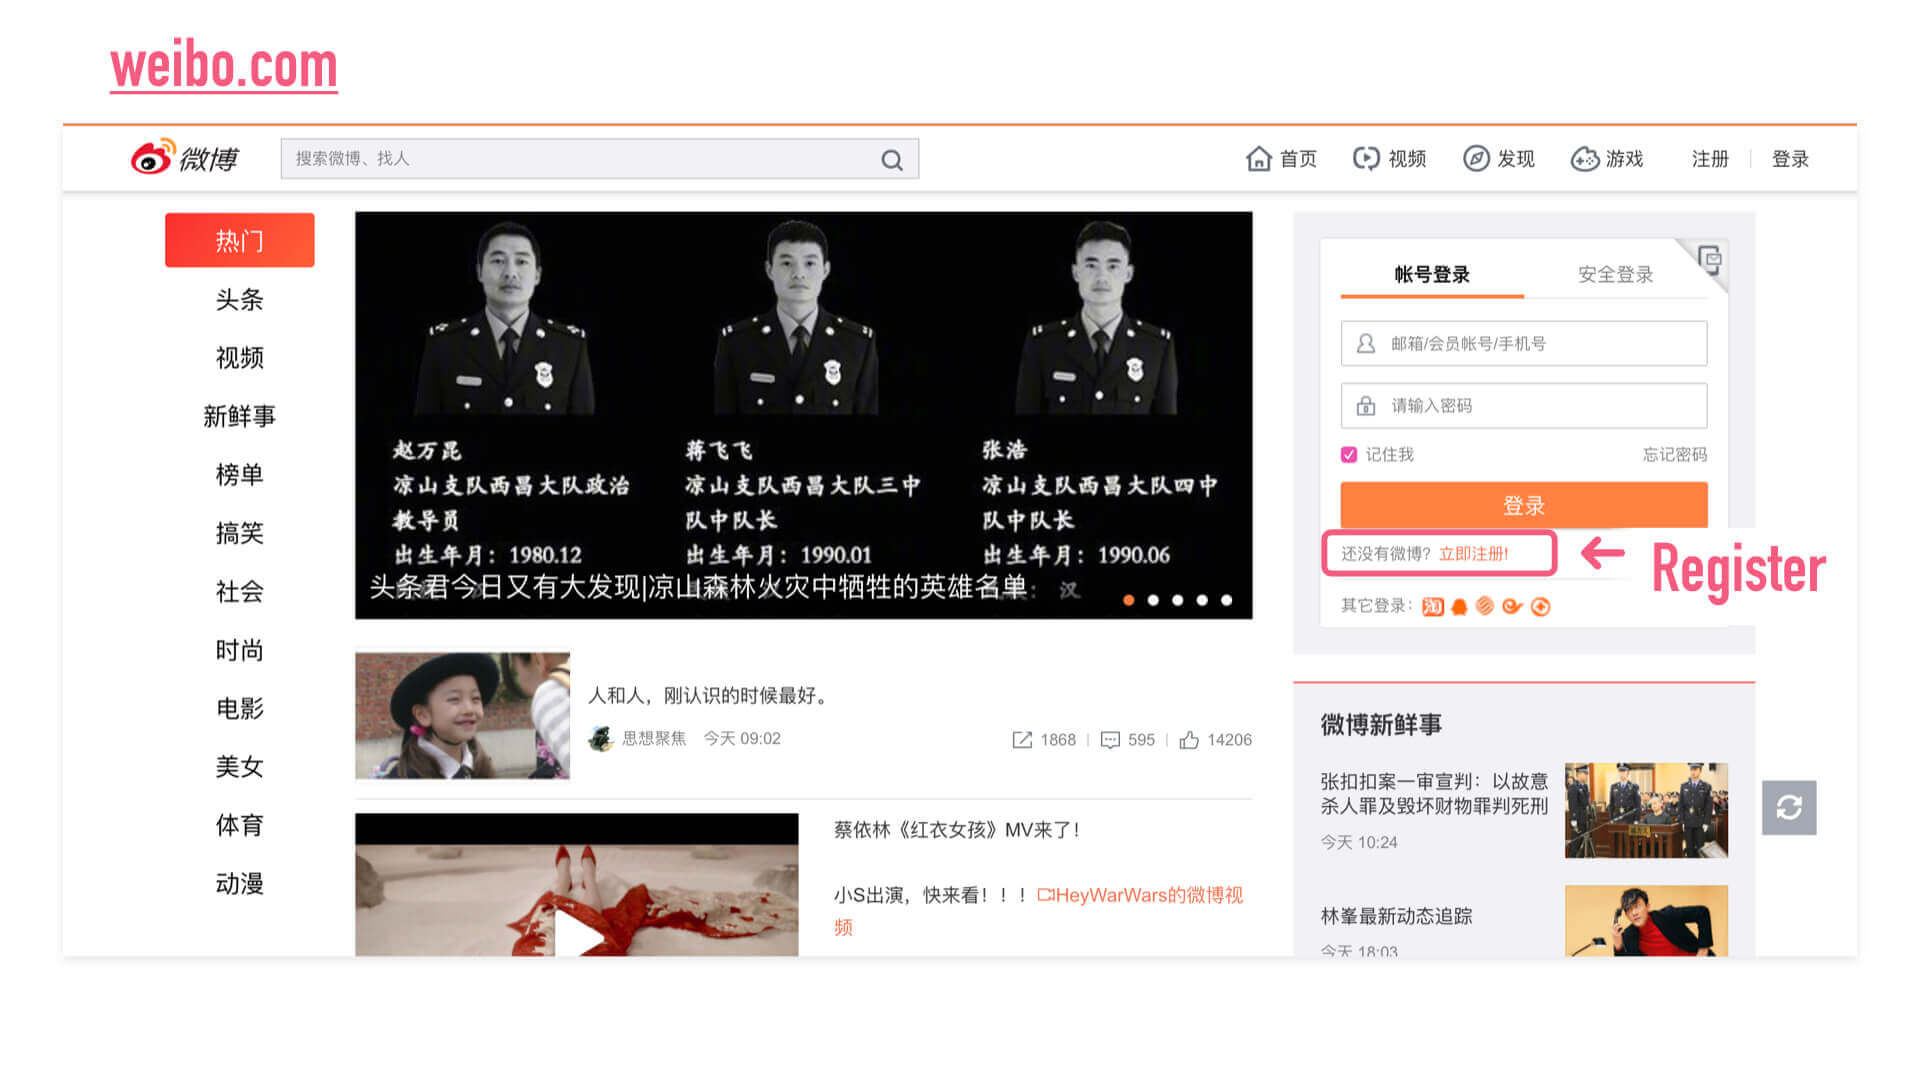 register weibo account, sign up weibo